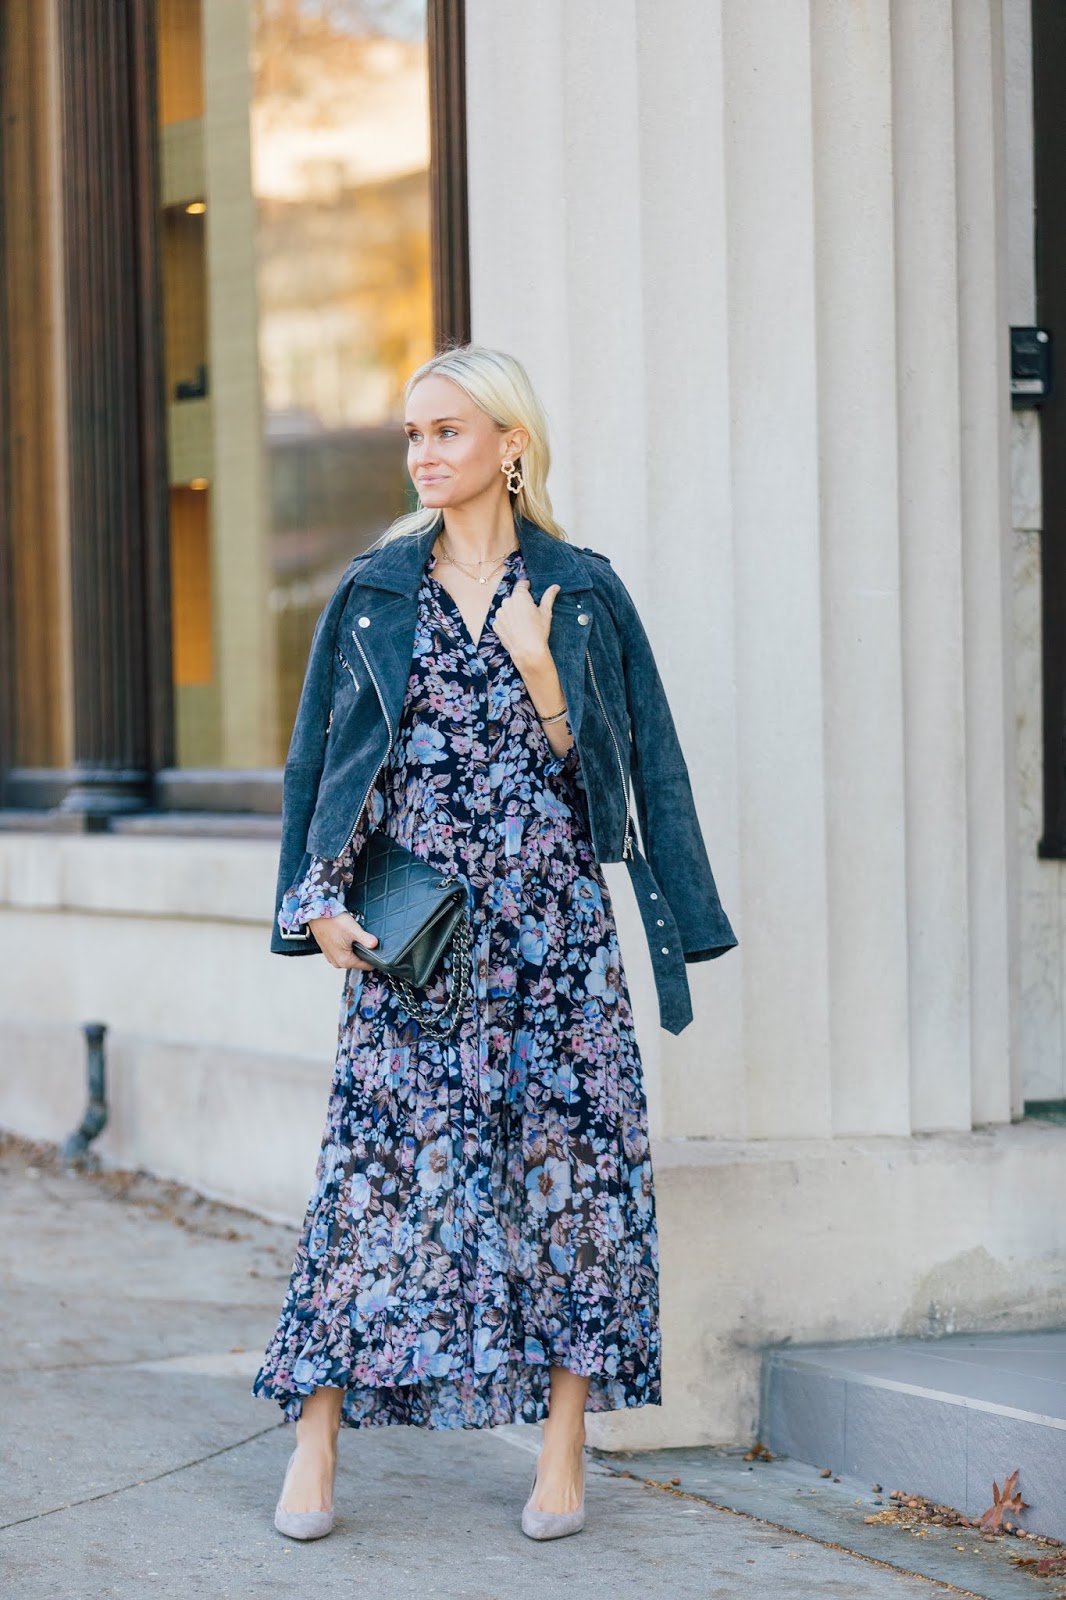 In My Closet: How to Style A Maxi Dress for Winter